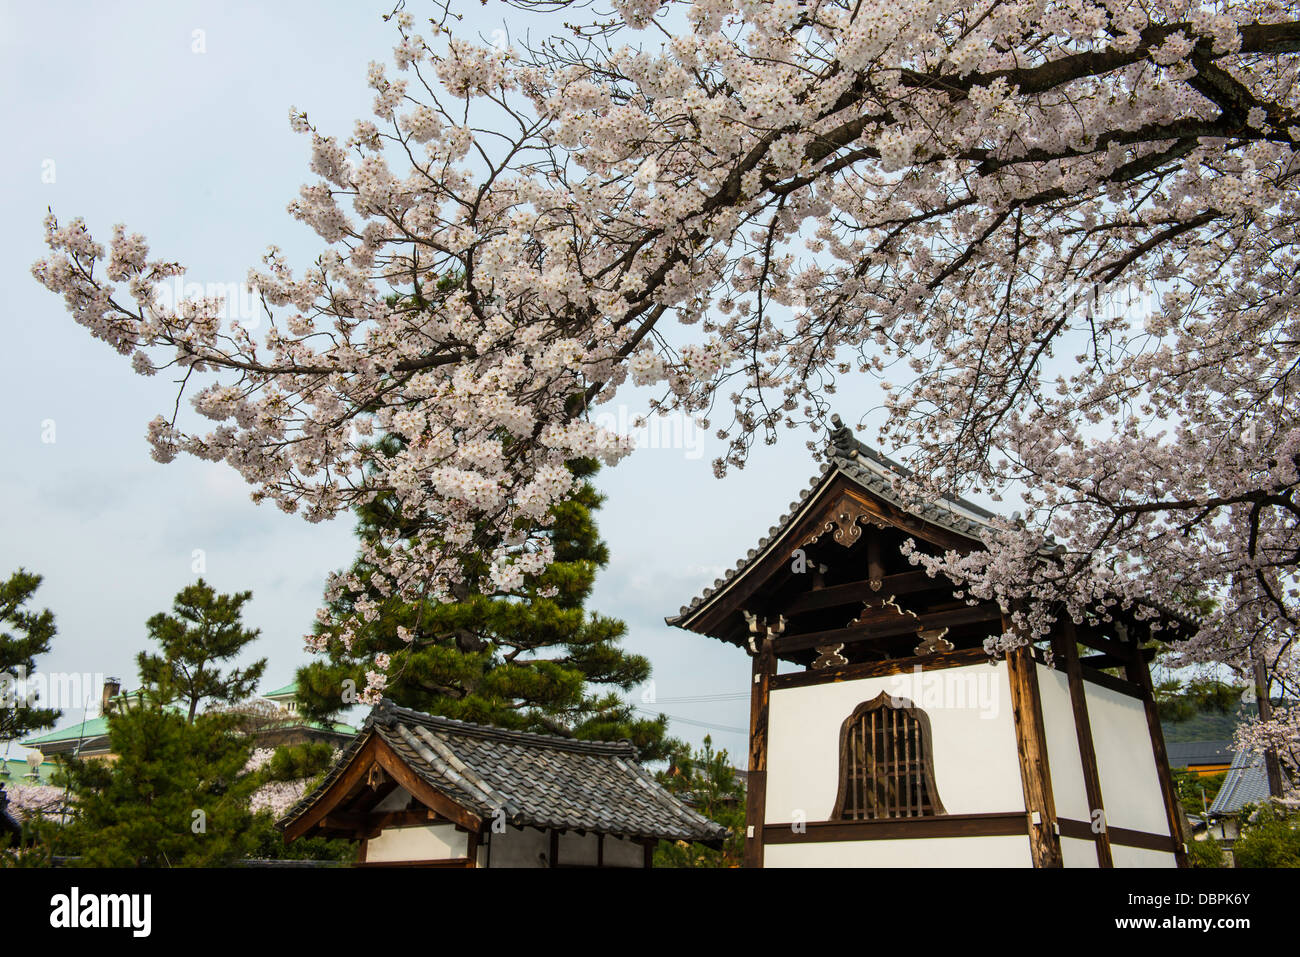 Shrine under cherry blossoms in the Geisha quarter of Gion, Kyoto, Japan, Asia Stock Photo